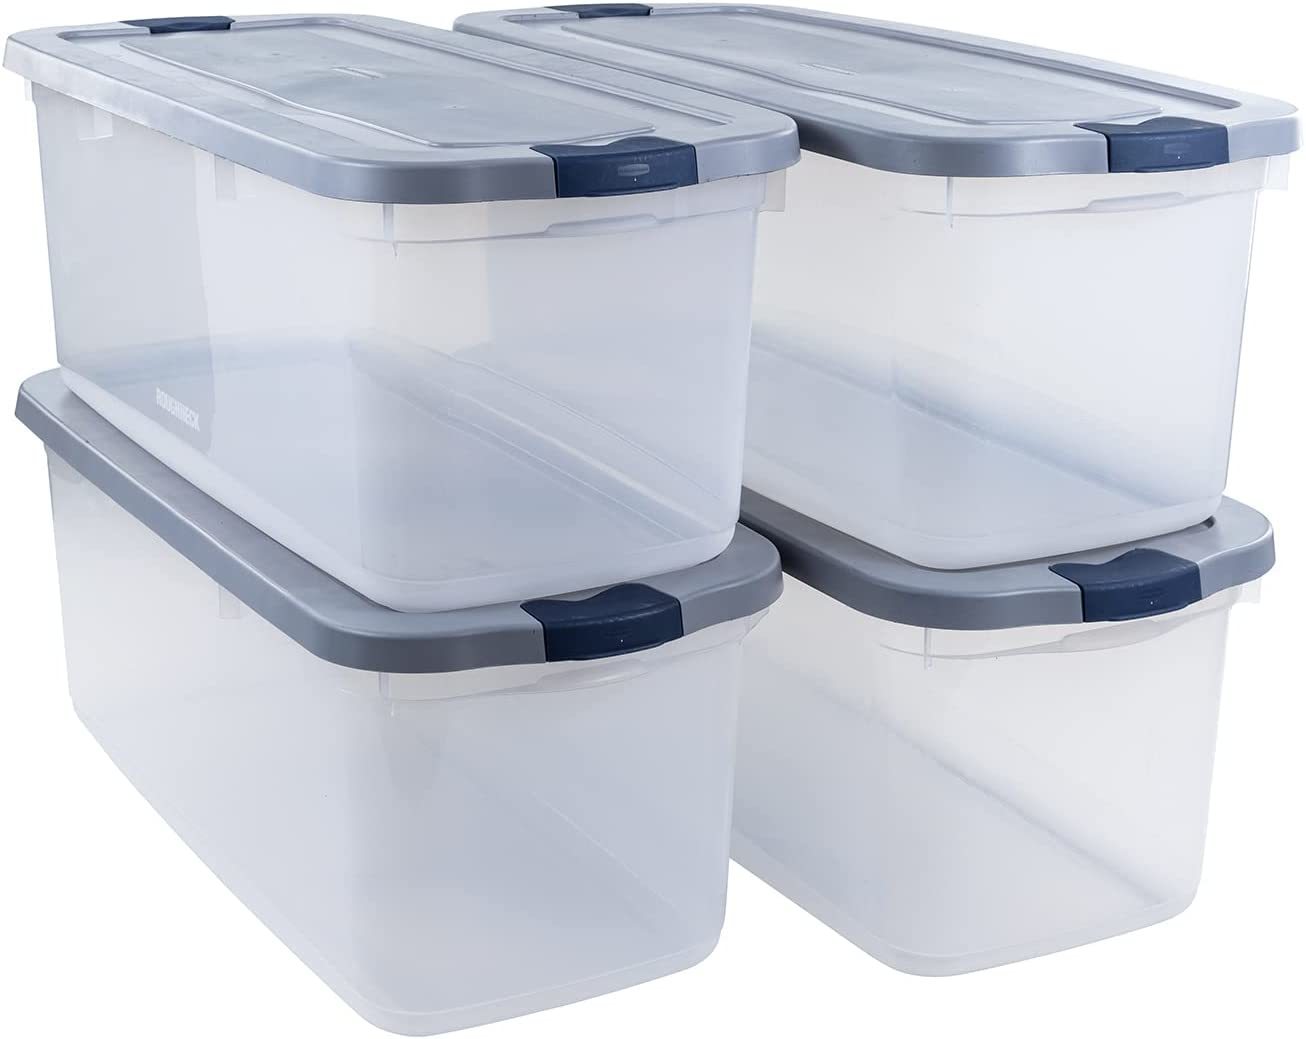 Rubbermaid Roughneck Clear 95 Qt/23.75 Gal Storage Containers, Pack Of 4 With - $169.99